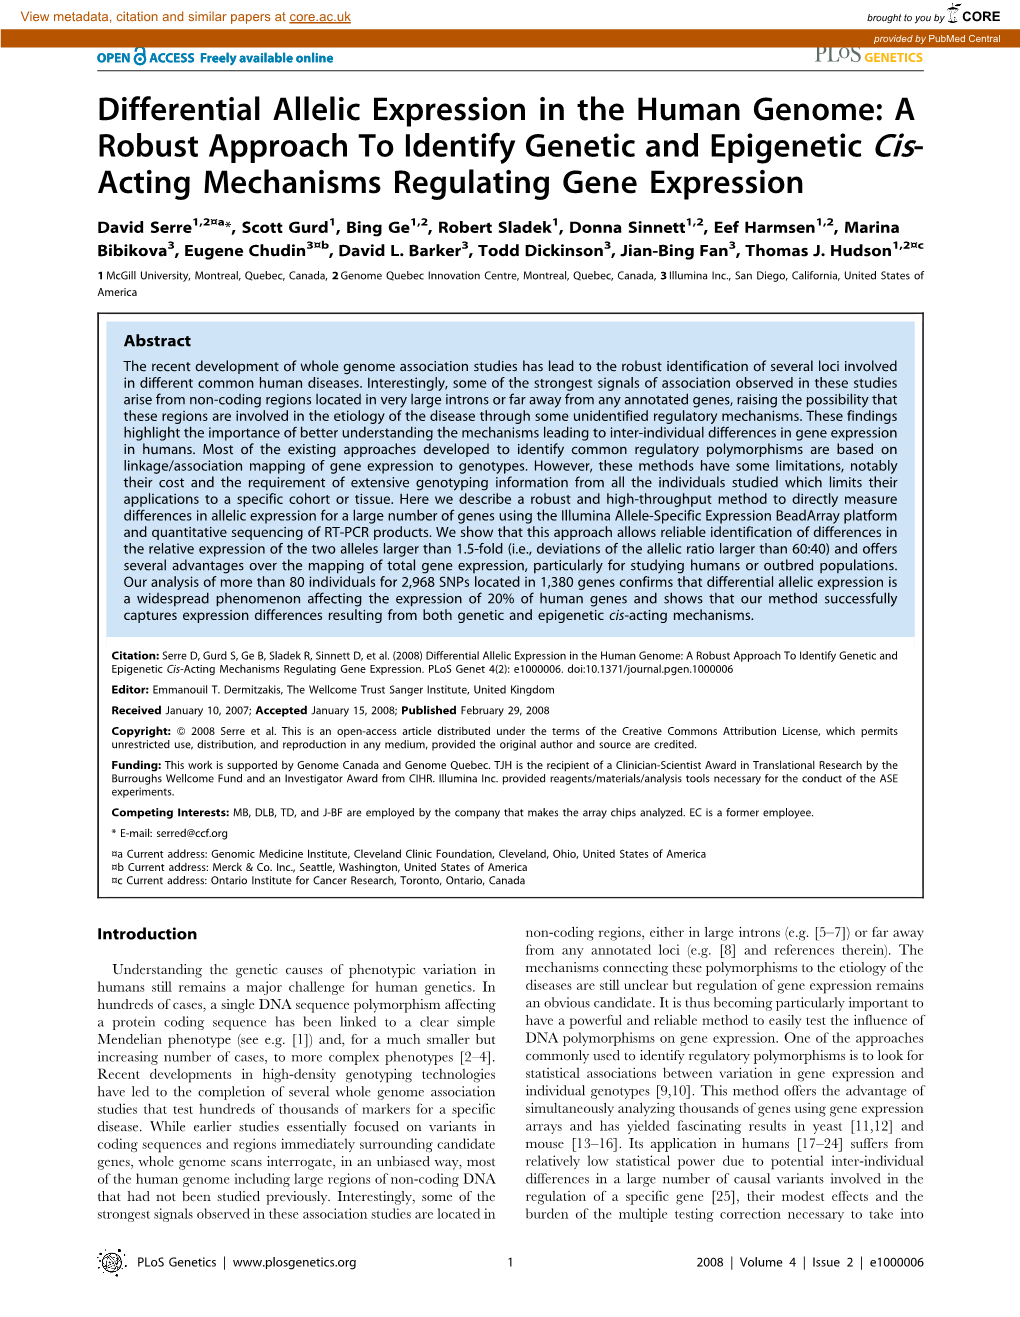 Differential Allelic Expression in the Human Genome: a Robust Approach to Identify Genetic and Epigenetic Cis- Acting Mechanisms Regulating Gene Expression